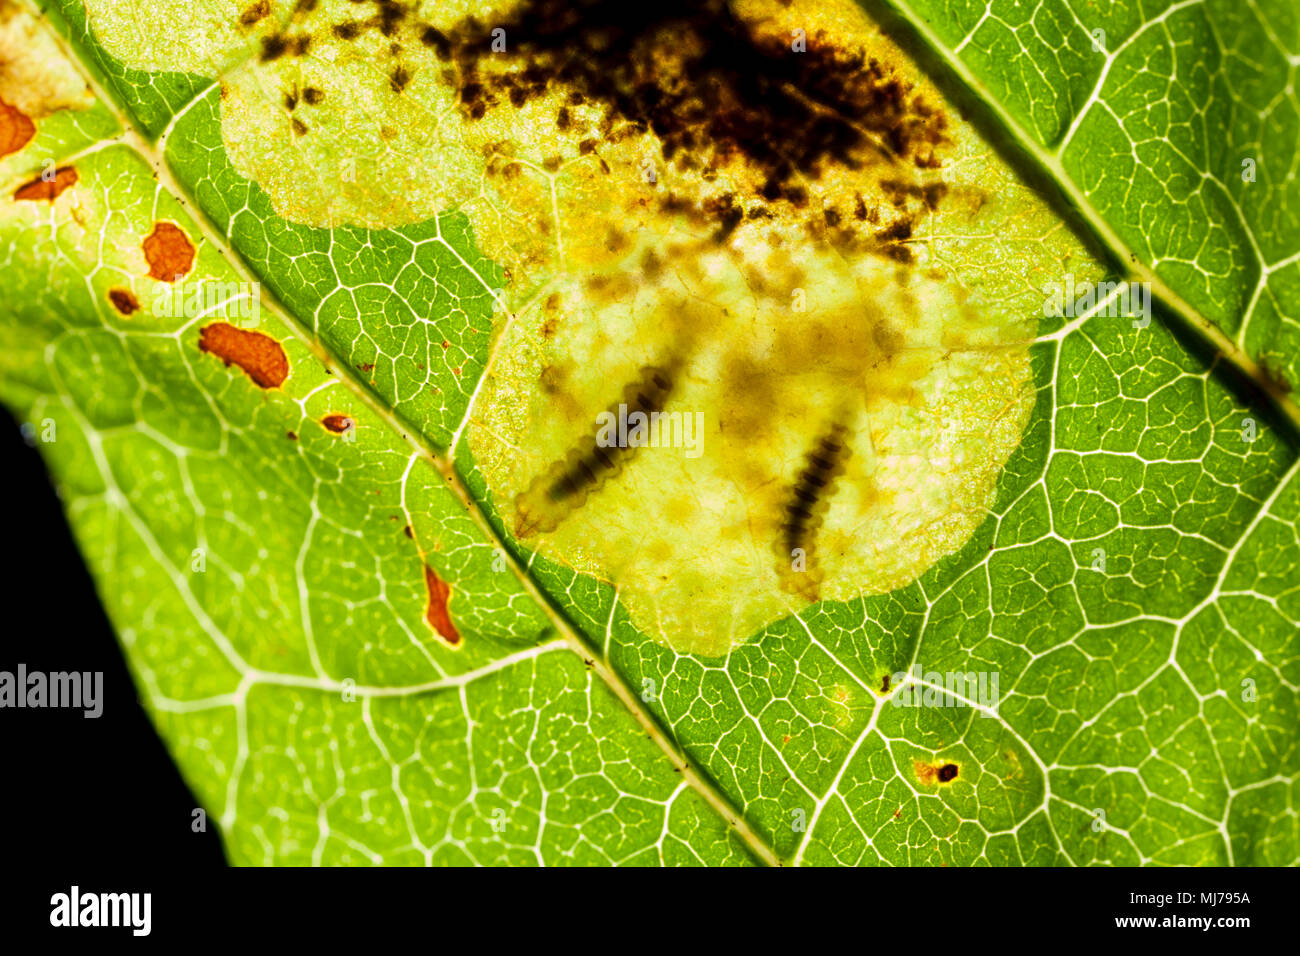 Larvae of the leaf-miner moth Cameraria ohridella, inside the leaf of a horse-chestnut tree, Aesculus hippocastanum. It was first discovered in the UK Stock Photo